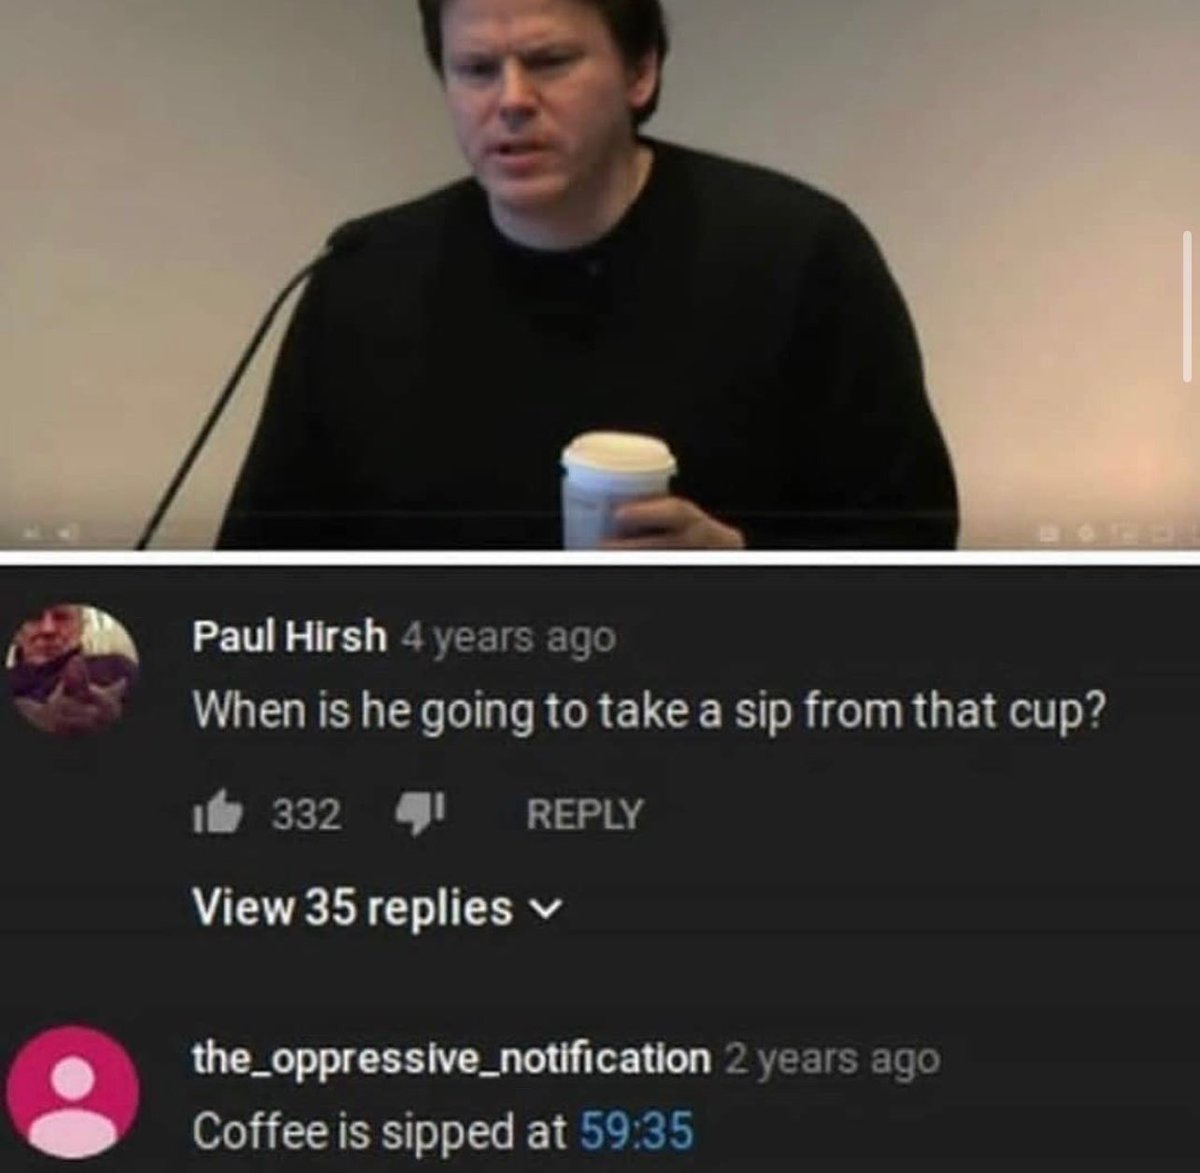 funny and savage youtube comments - Paul Hirsh 4 years ago When is he going to take a sip from that cup? 133241 View 35 replies the oppressive_notification 2 years ago Coffee is sipped at